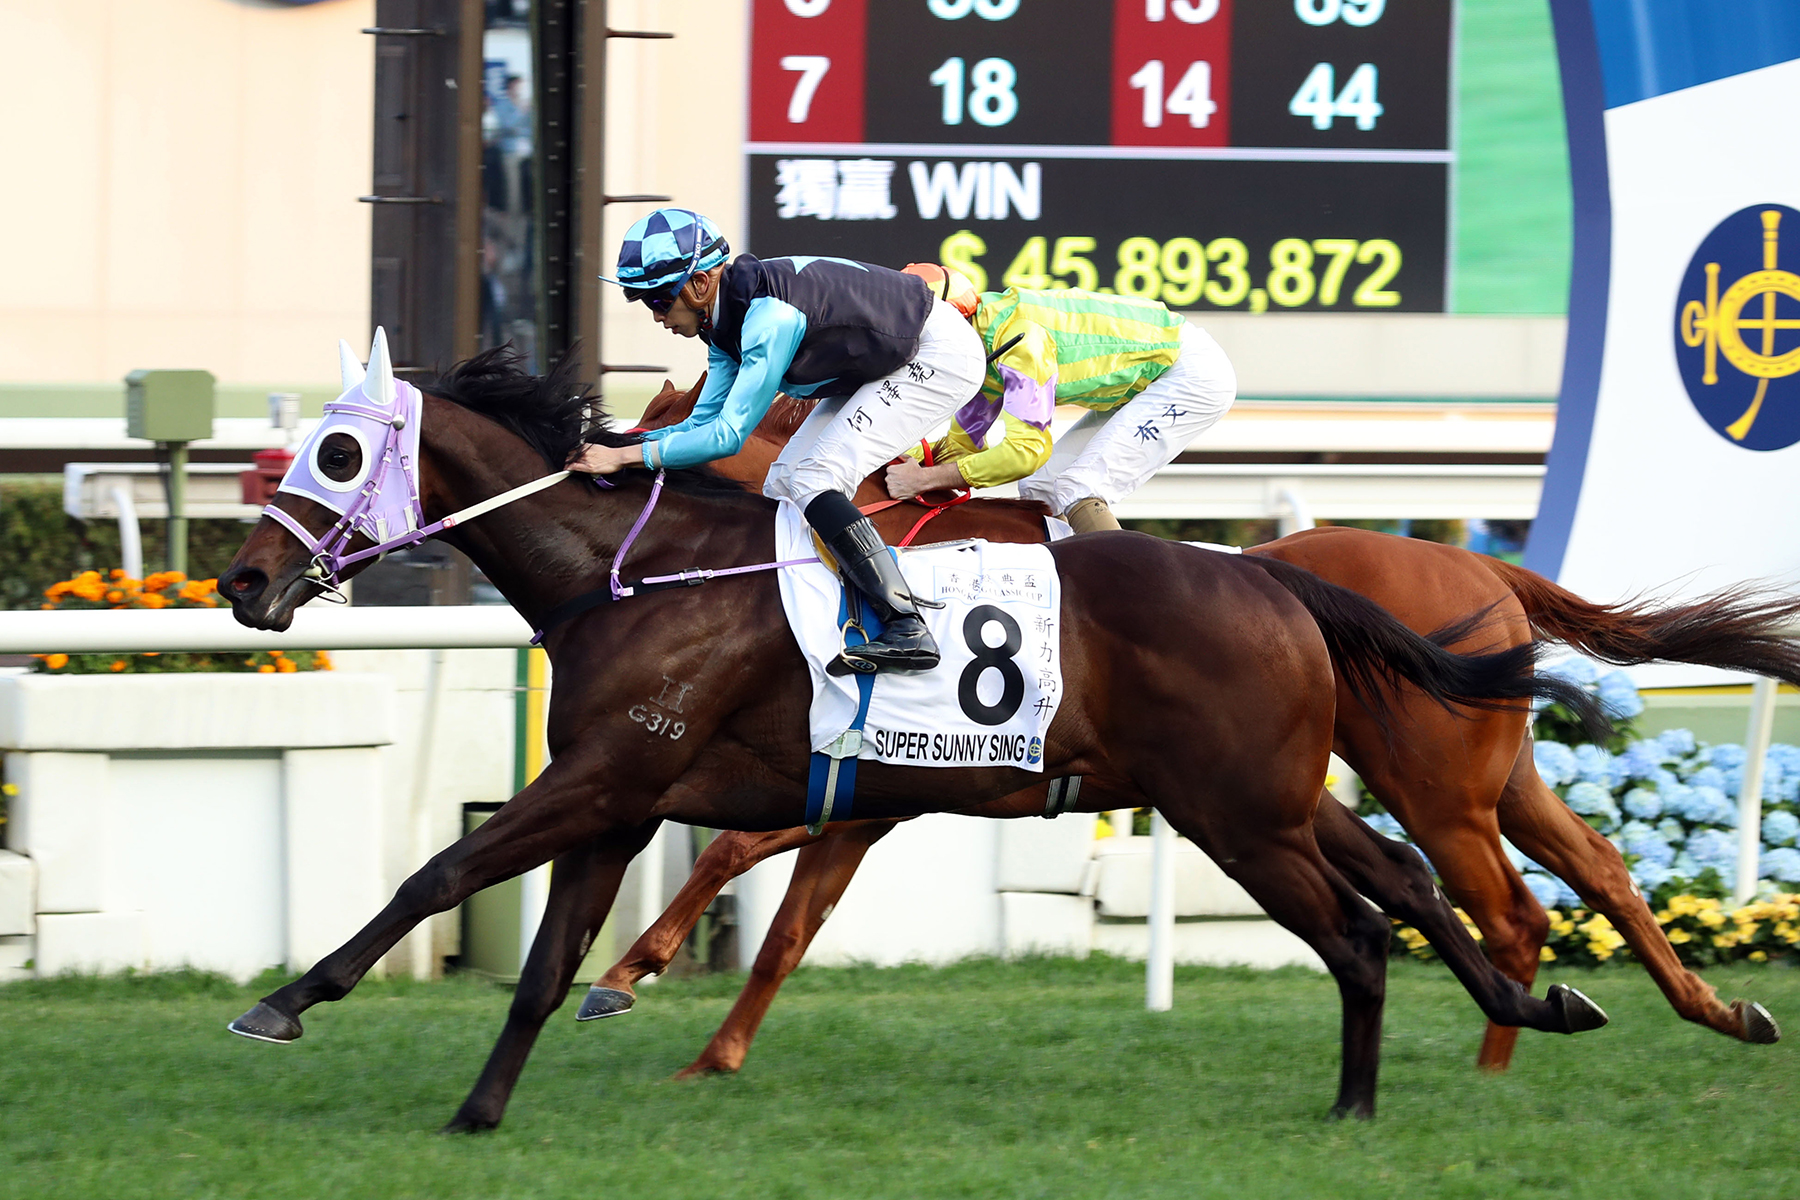 The Chris So-trained Super Sunny Sing (No. 8), ridden by Vincent Ho, takes the Hong Kong Classic Cup (1800m) at Sha Tin Racecourse today (Sunday, 26 February).